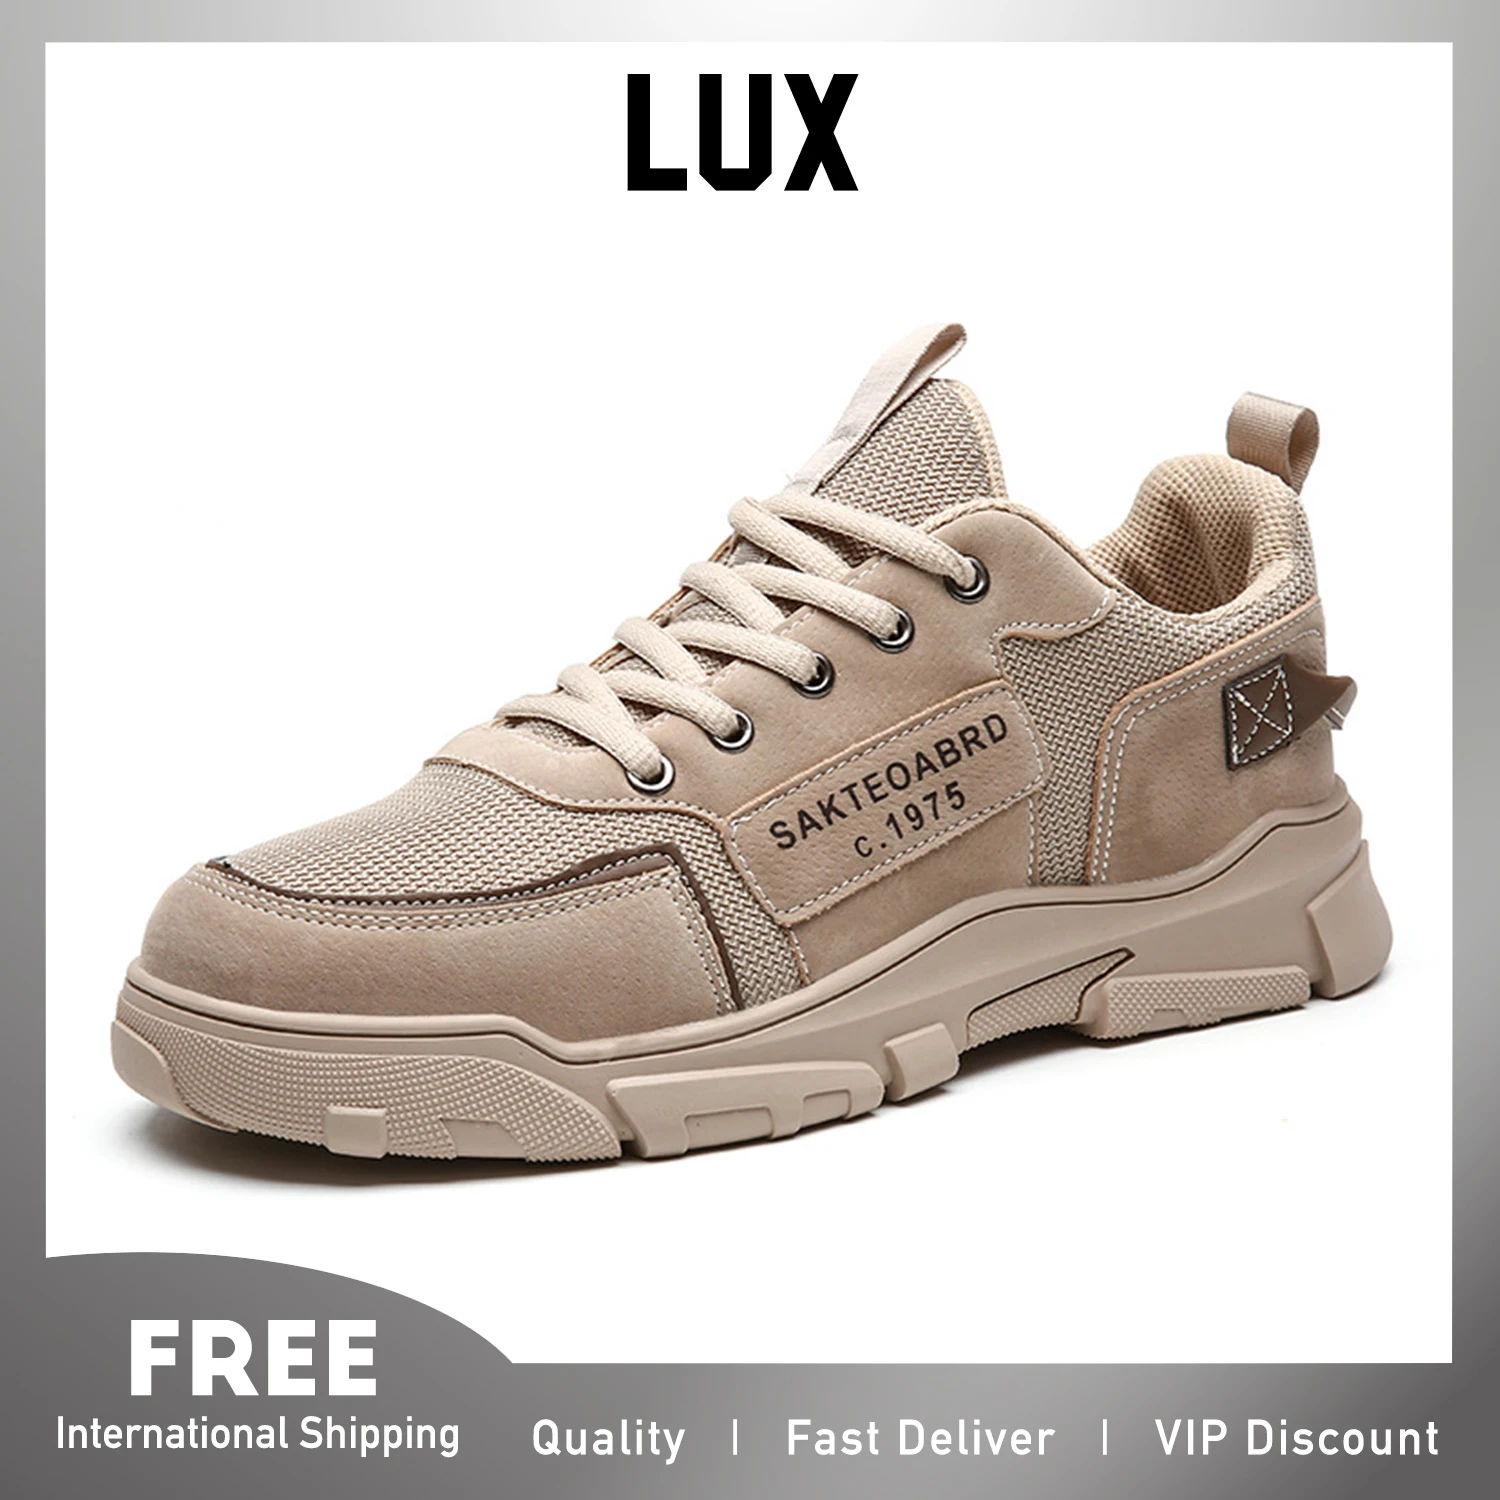 

Lux Winter Low Rise Martins Boots for Men Outdoor Khaki Boots Waterproof Classic Casual Boots Street Fashion Style